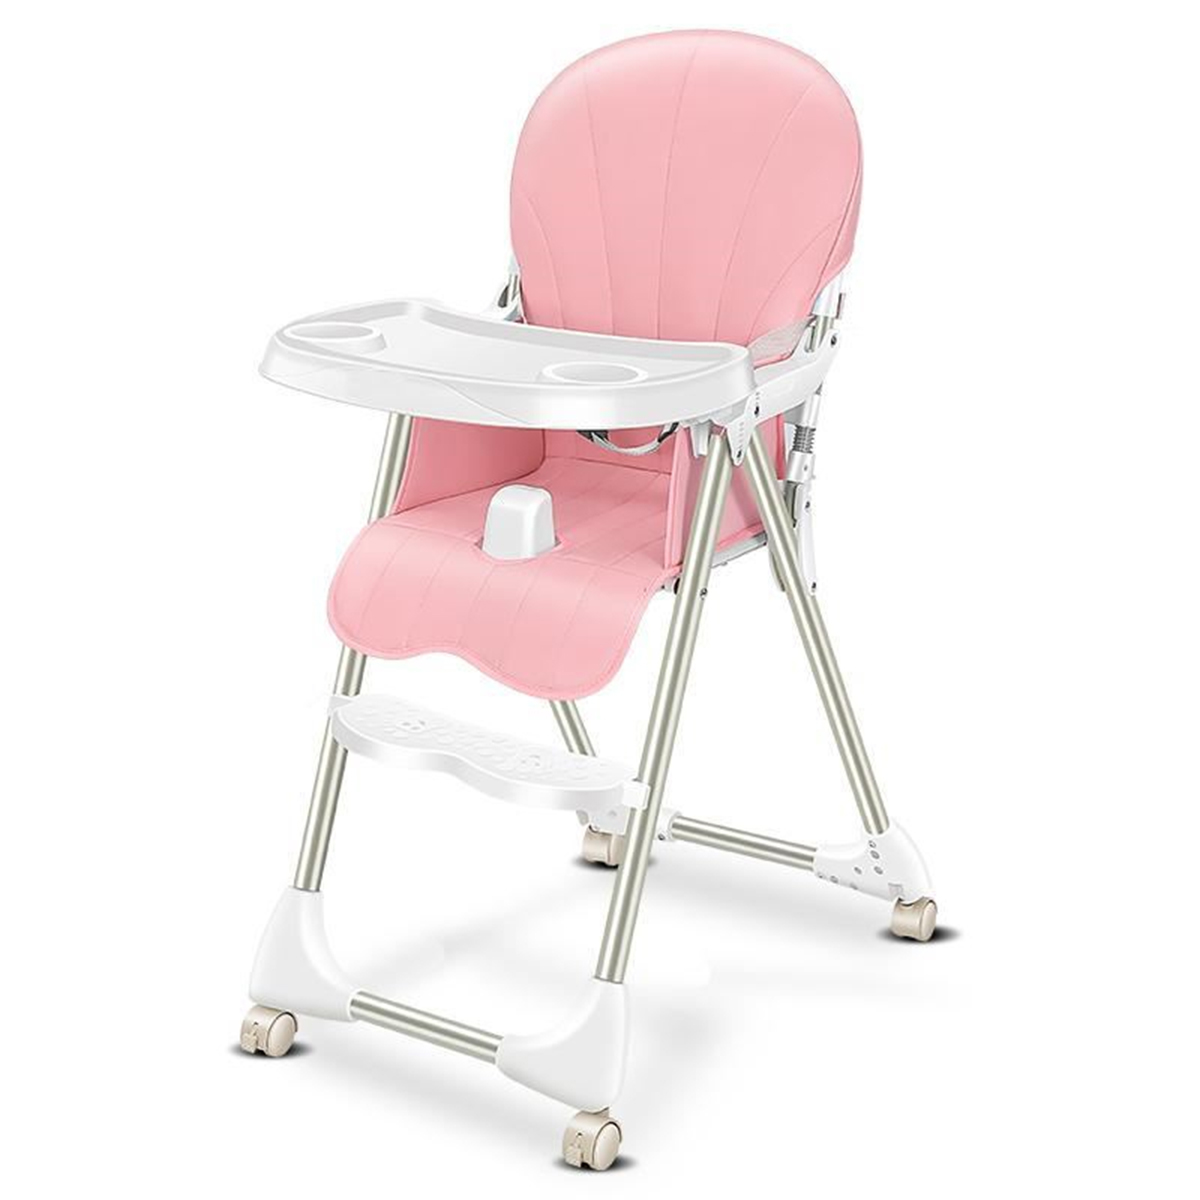 Ditong-Portable-Folding-Baby-High-Chair-Adjustable-Plate-Lockable-Wheels-PU-Seat-with-Environmental--1748389-1